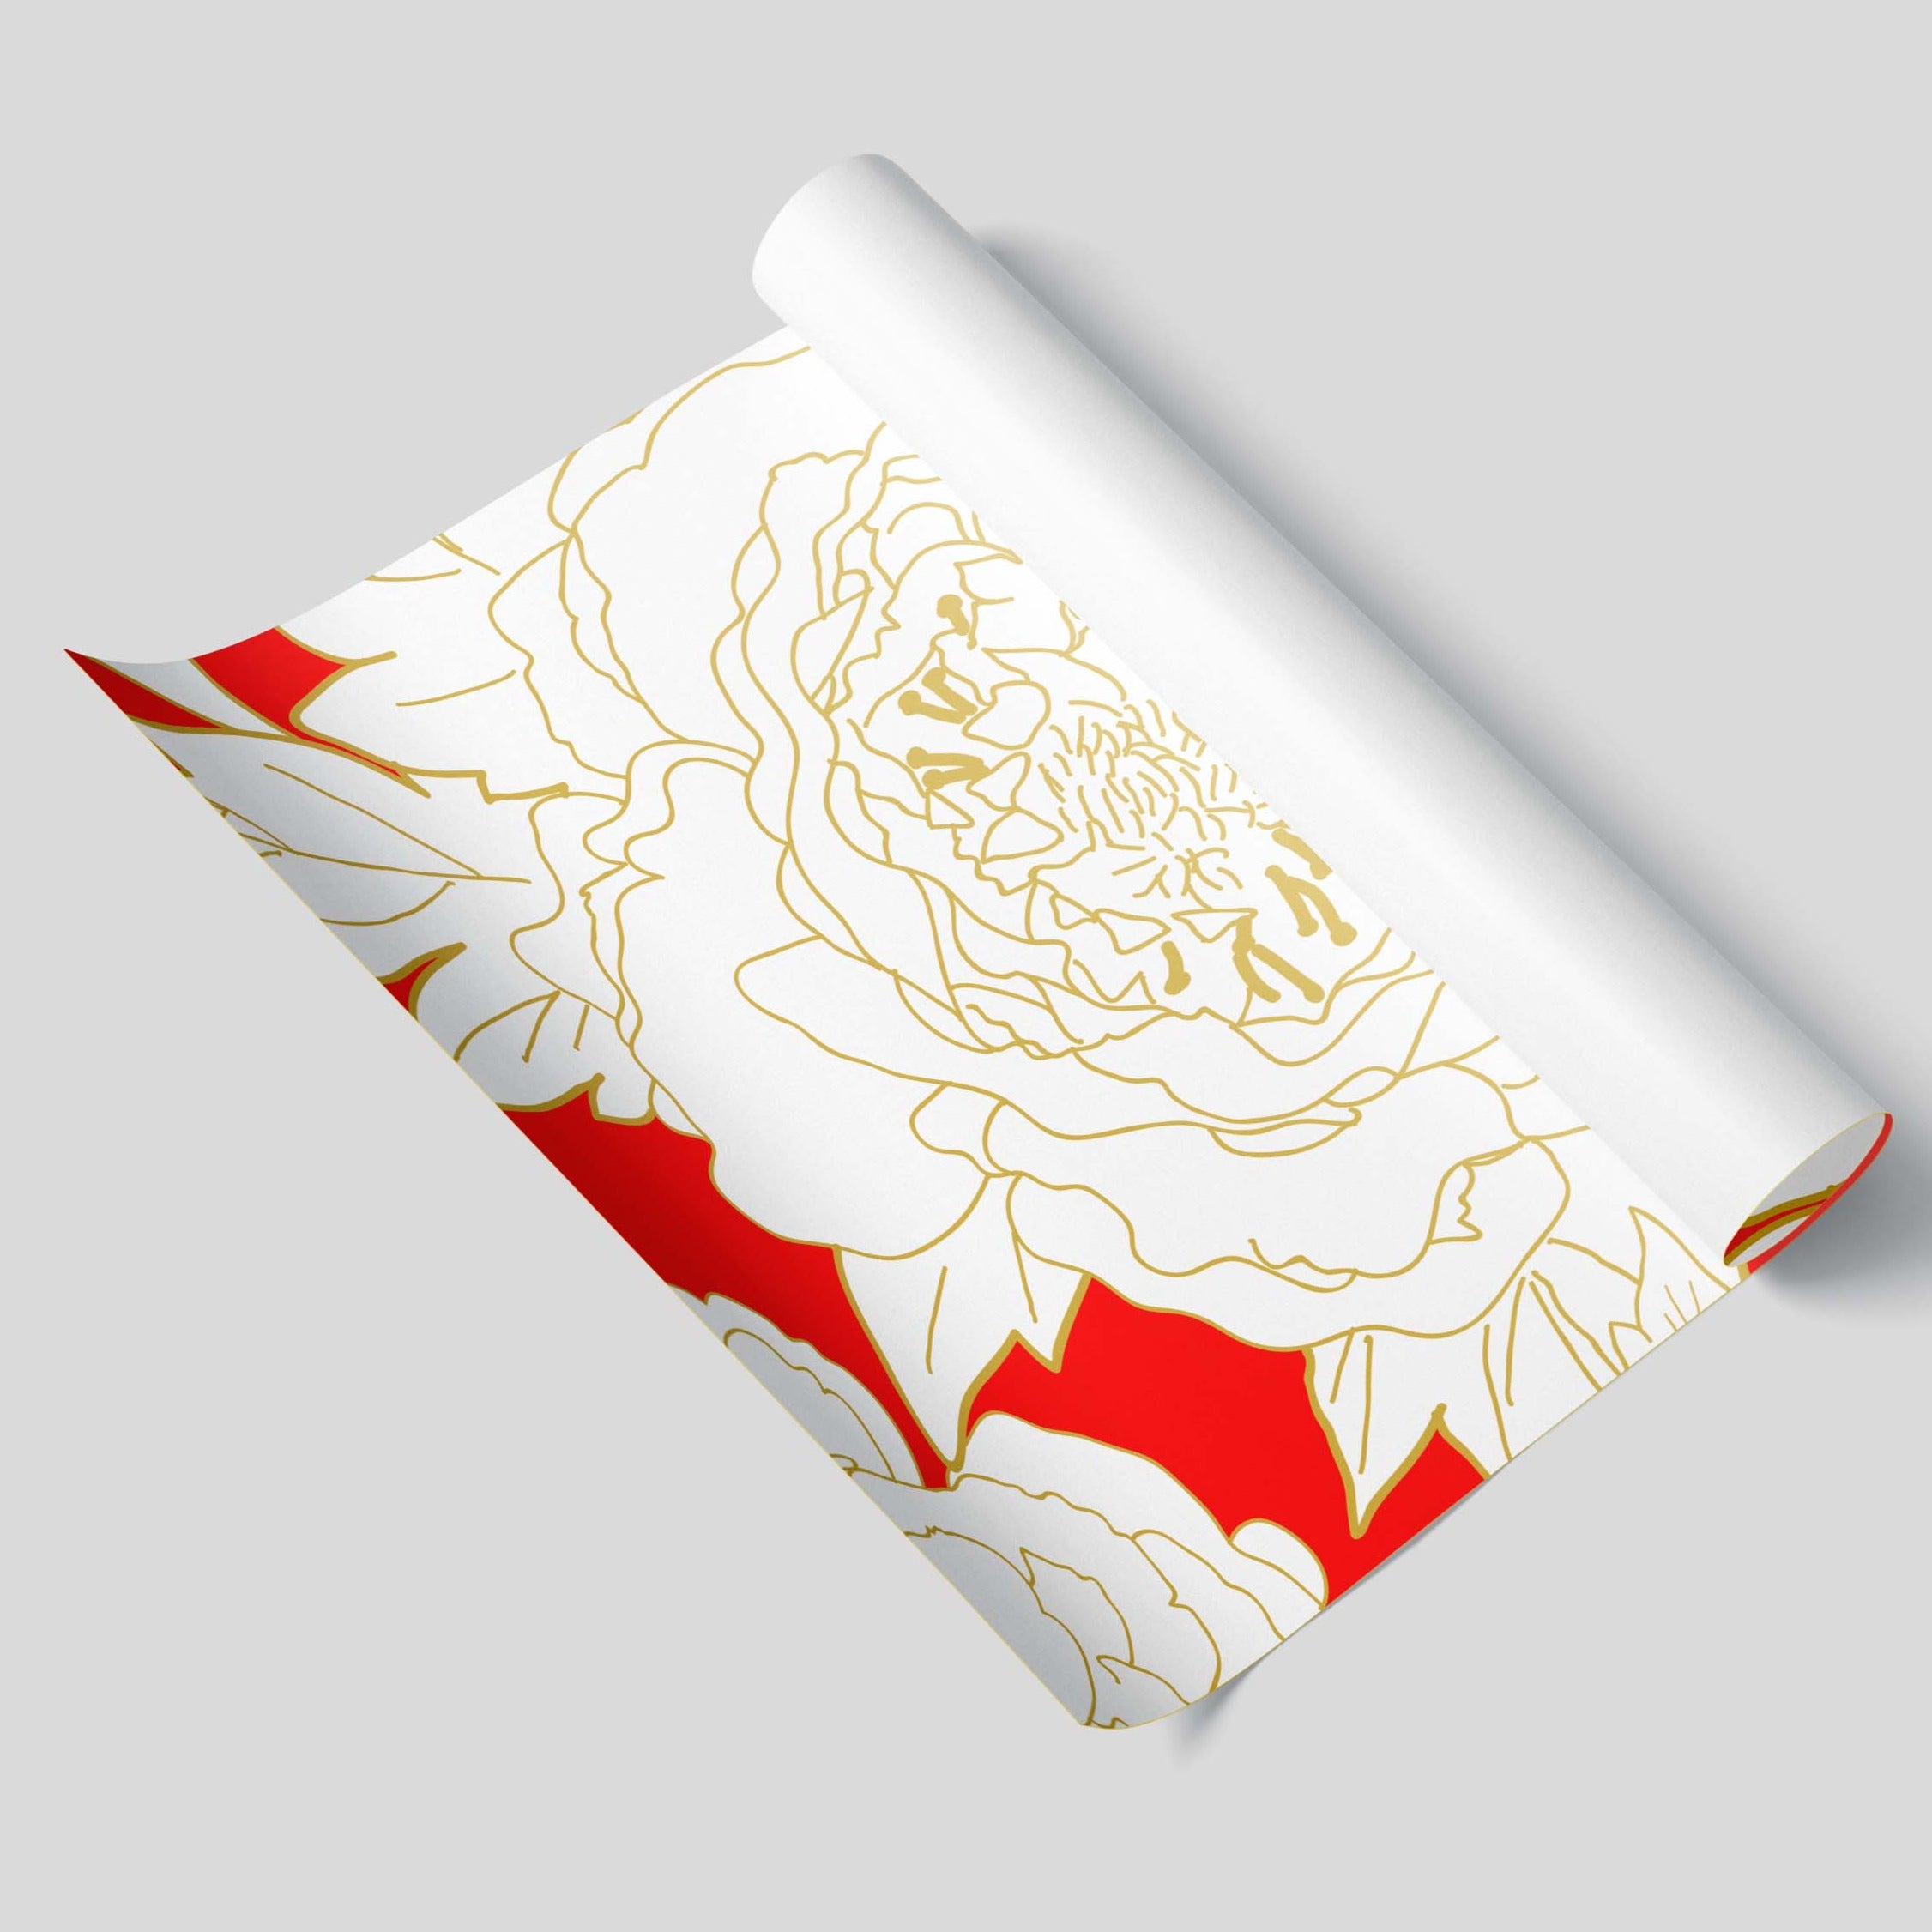 Red Holiday Wrapping Paper